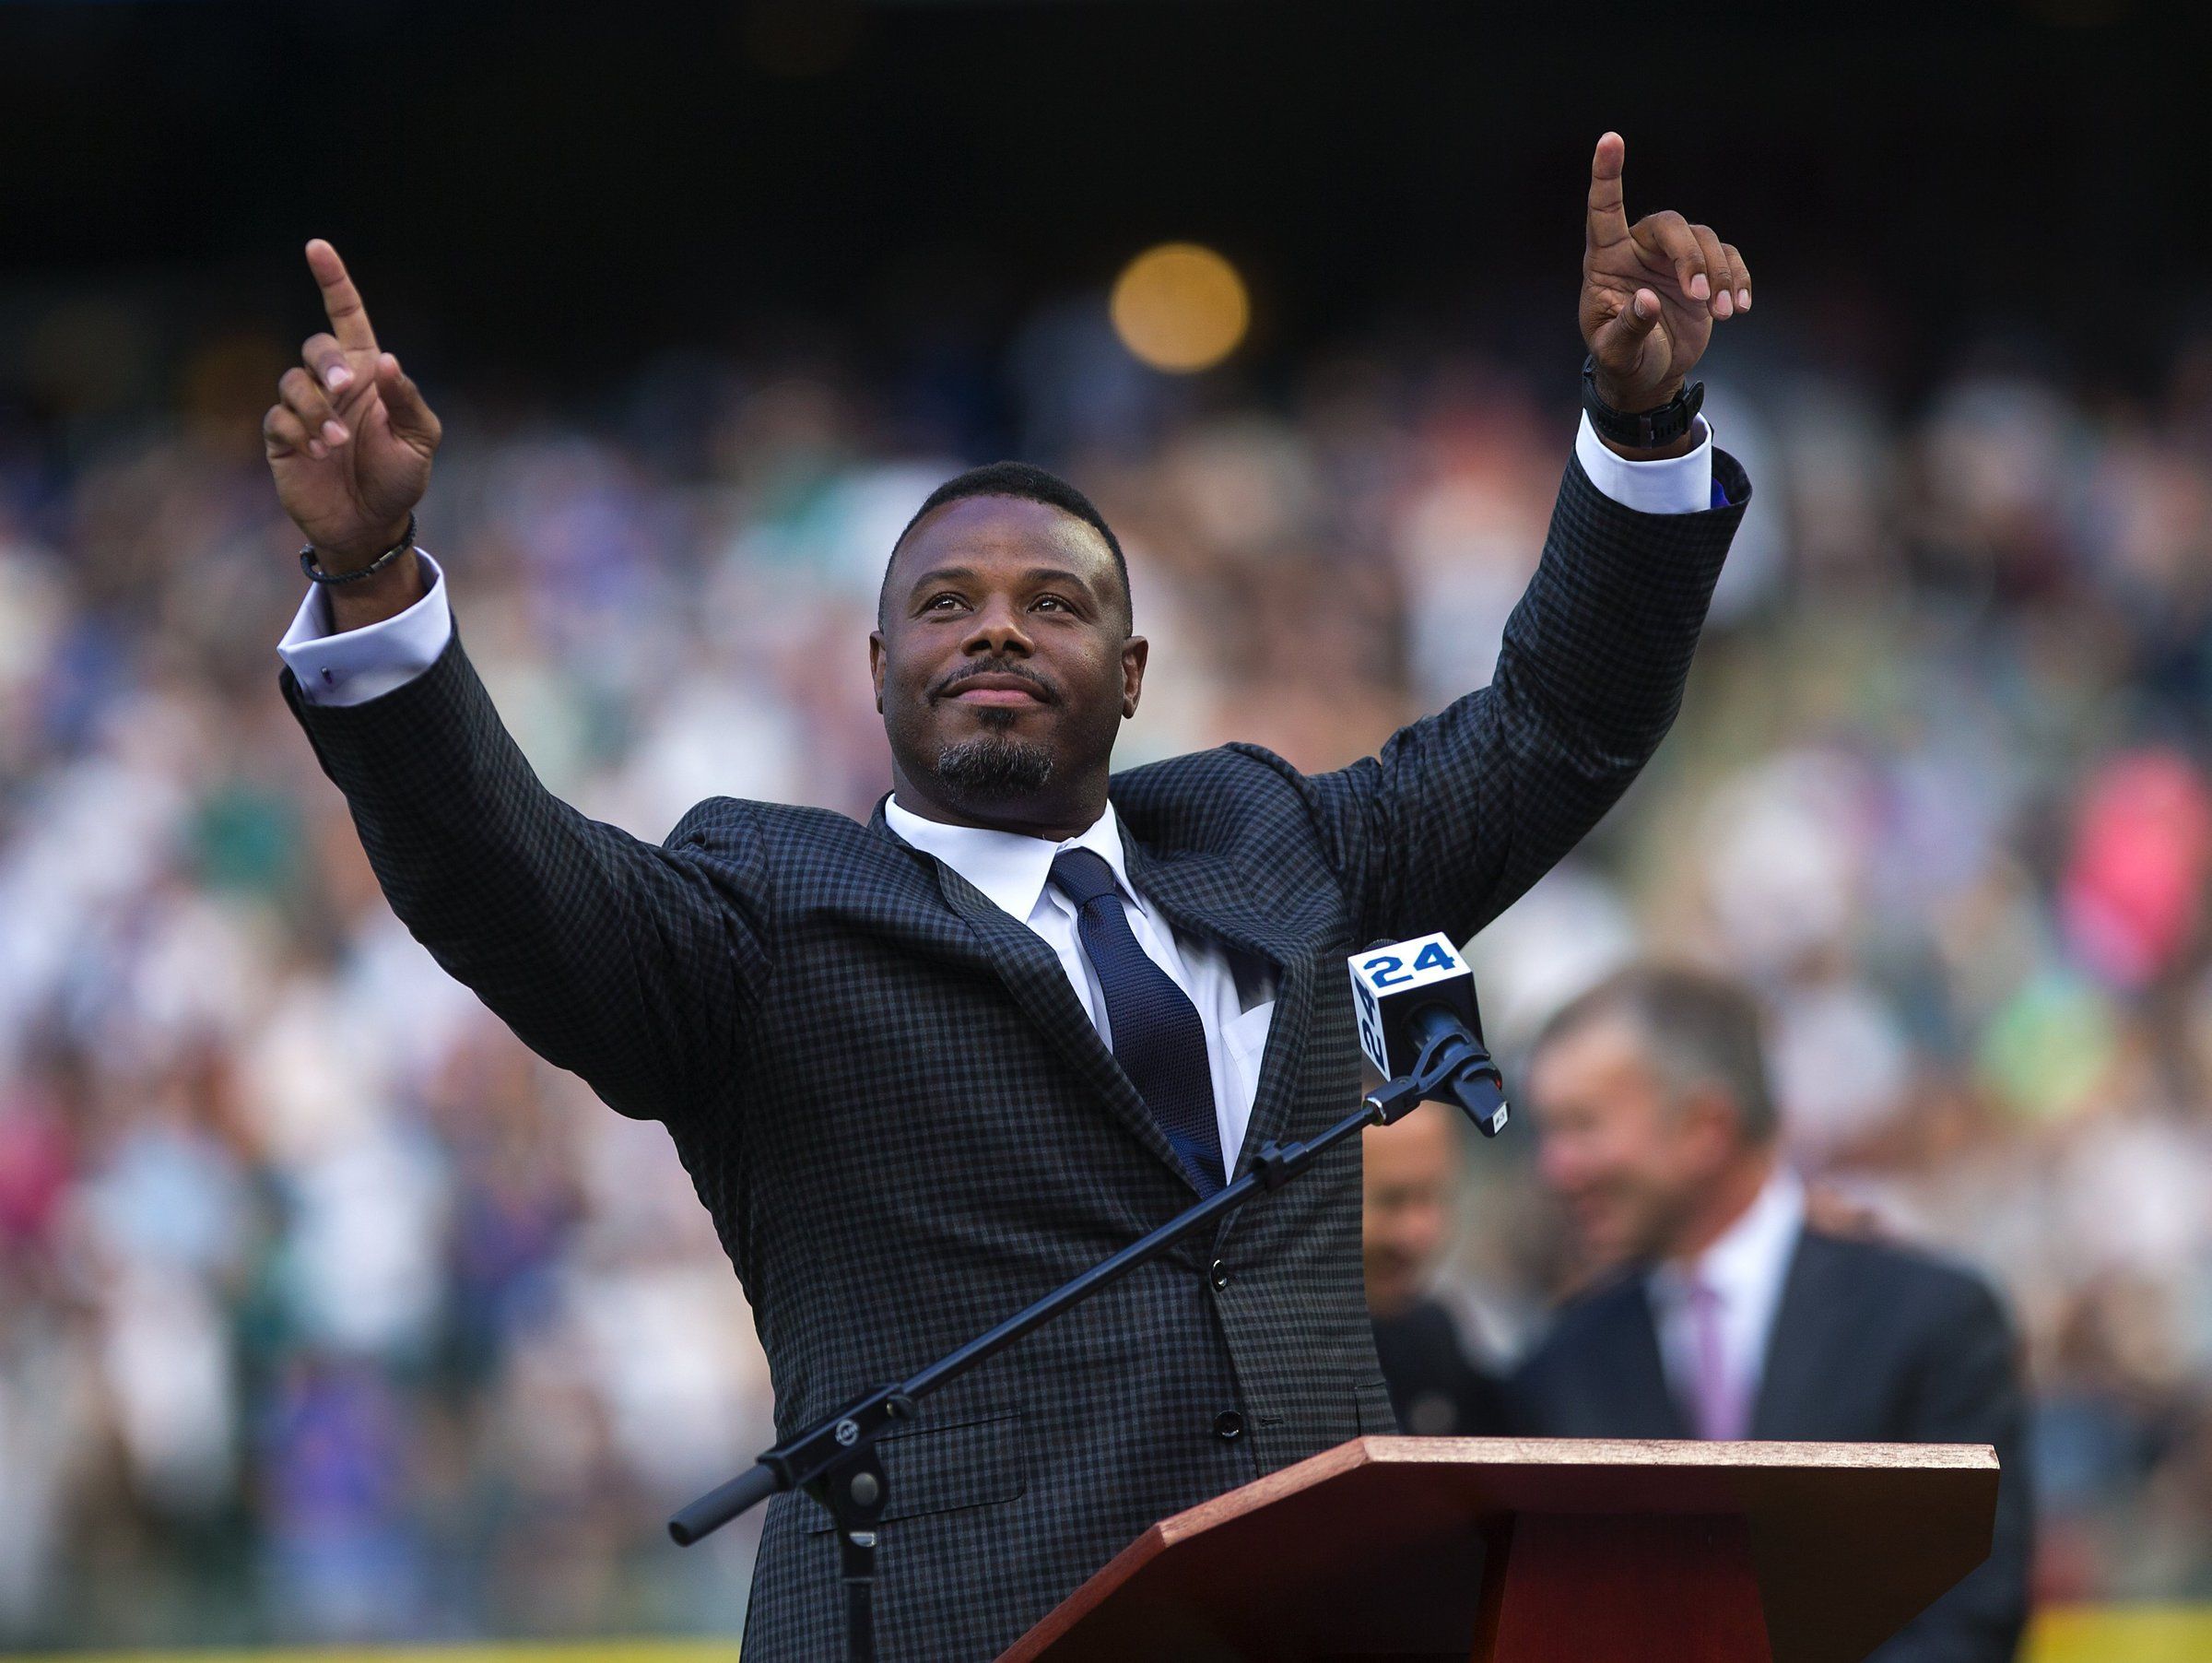 A Safeco Field packed with fans and all-time greats honor Mariners